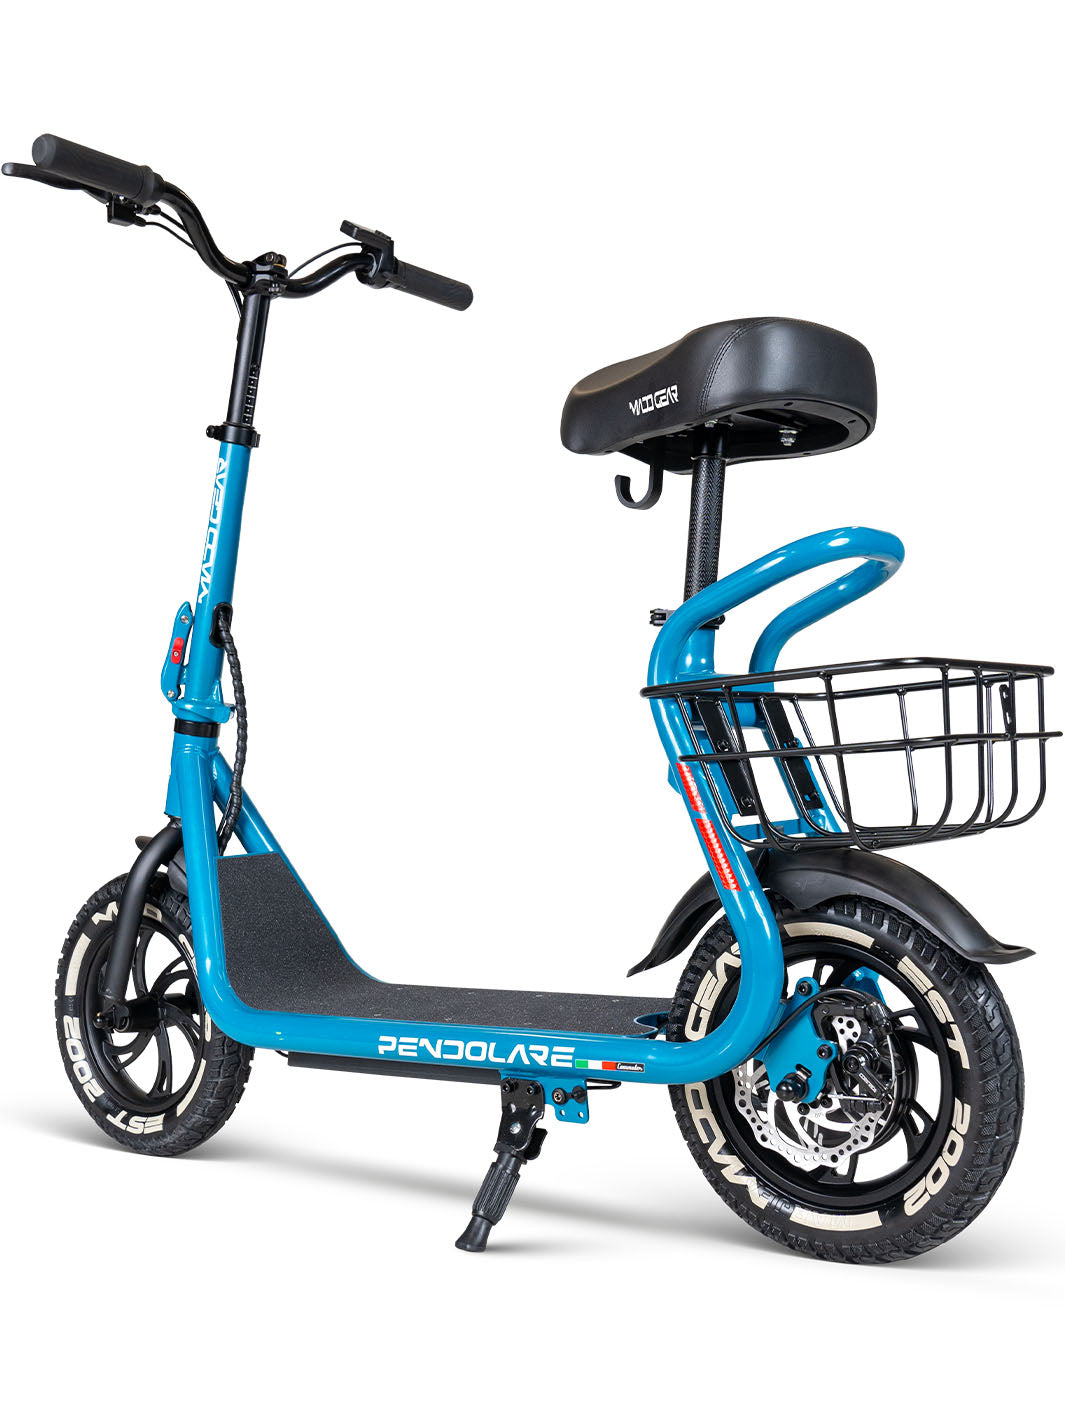 Madd Gear Commute Electric Pendolare 300 Scooter Jetson Teens Adults Blue